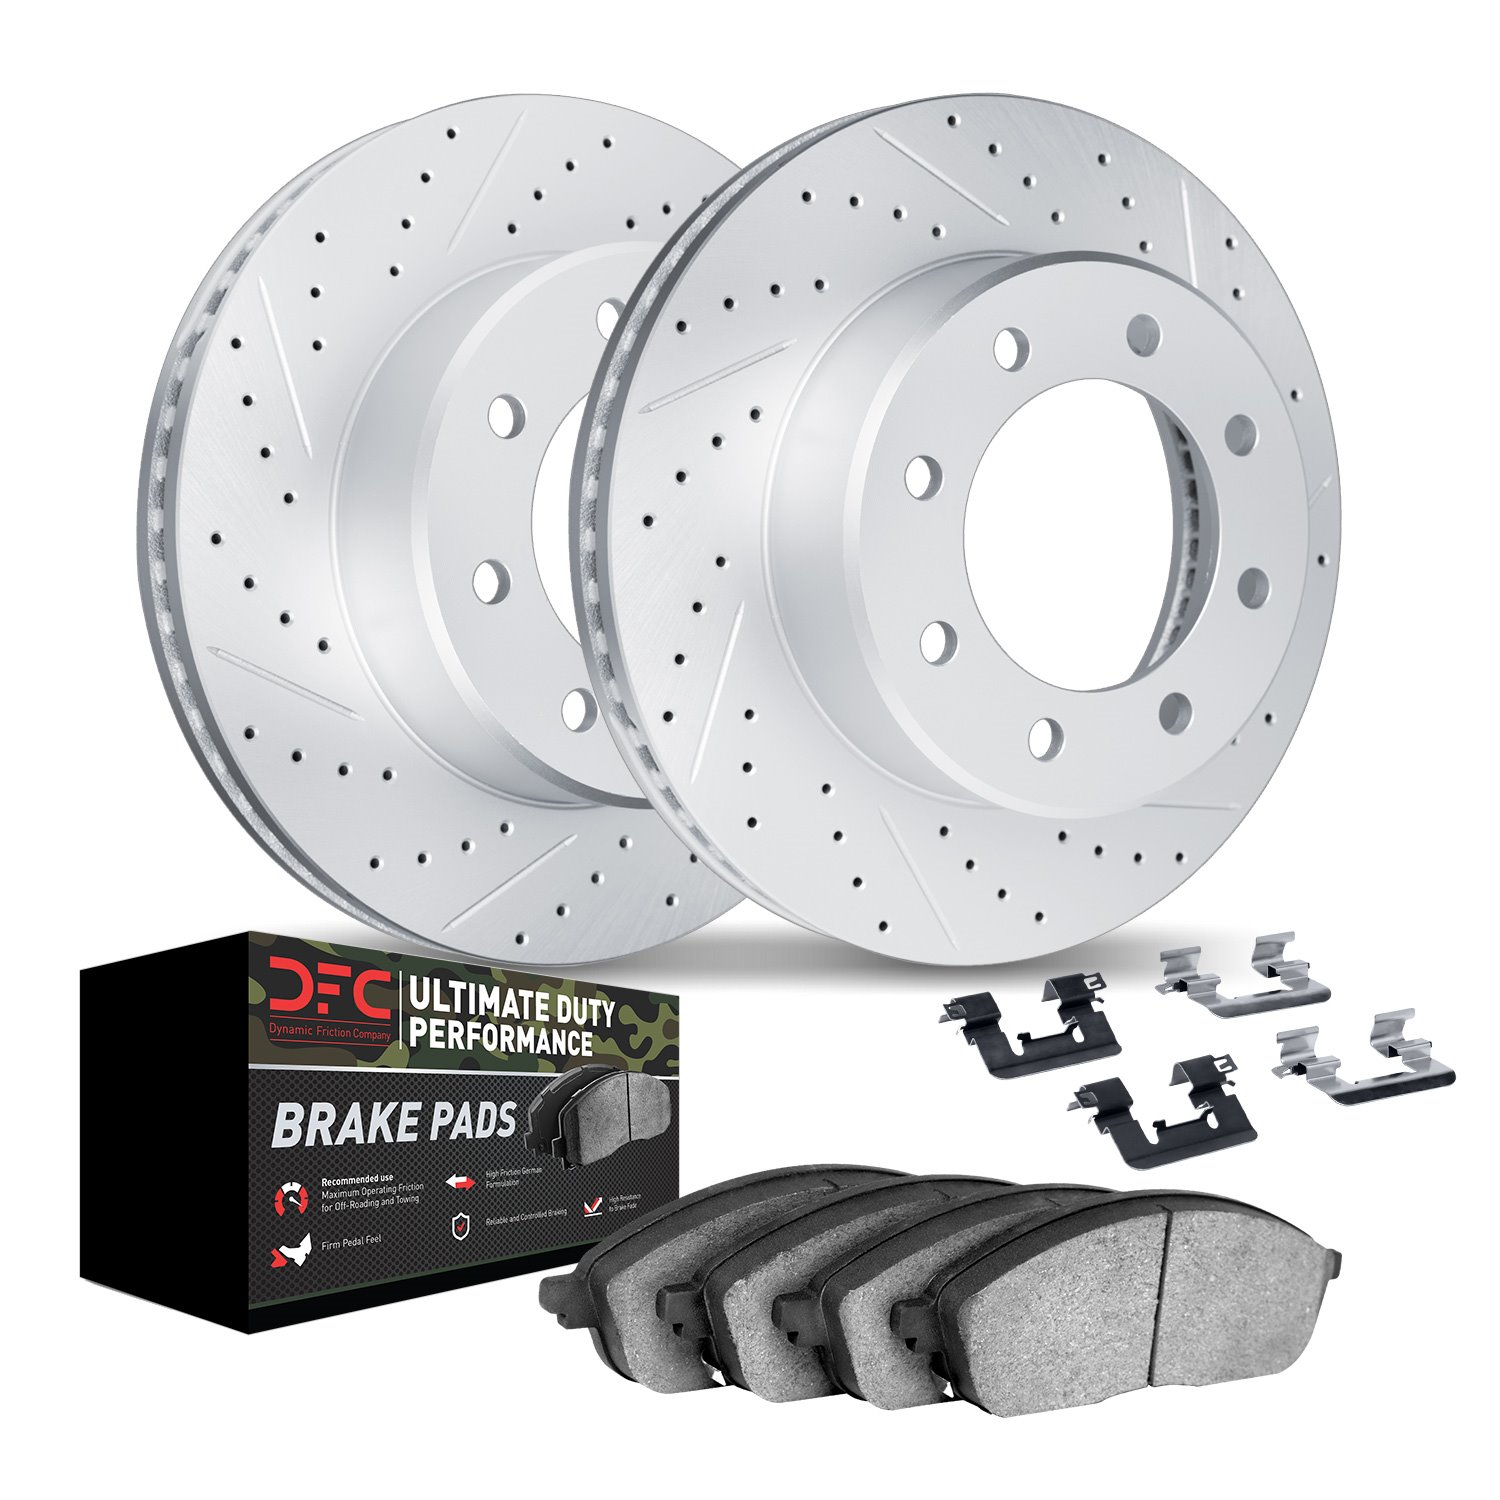 2412-54066 Geoperformance Drilled/Slotted Brake Rotors with Ultimate-Duty Brake Pads Kit & Hardware, 2006-2010 Ford/Lincoln/Merc